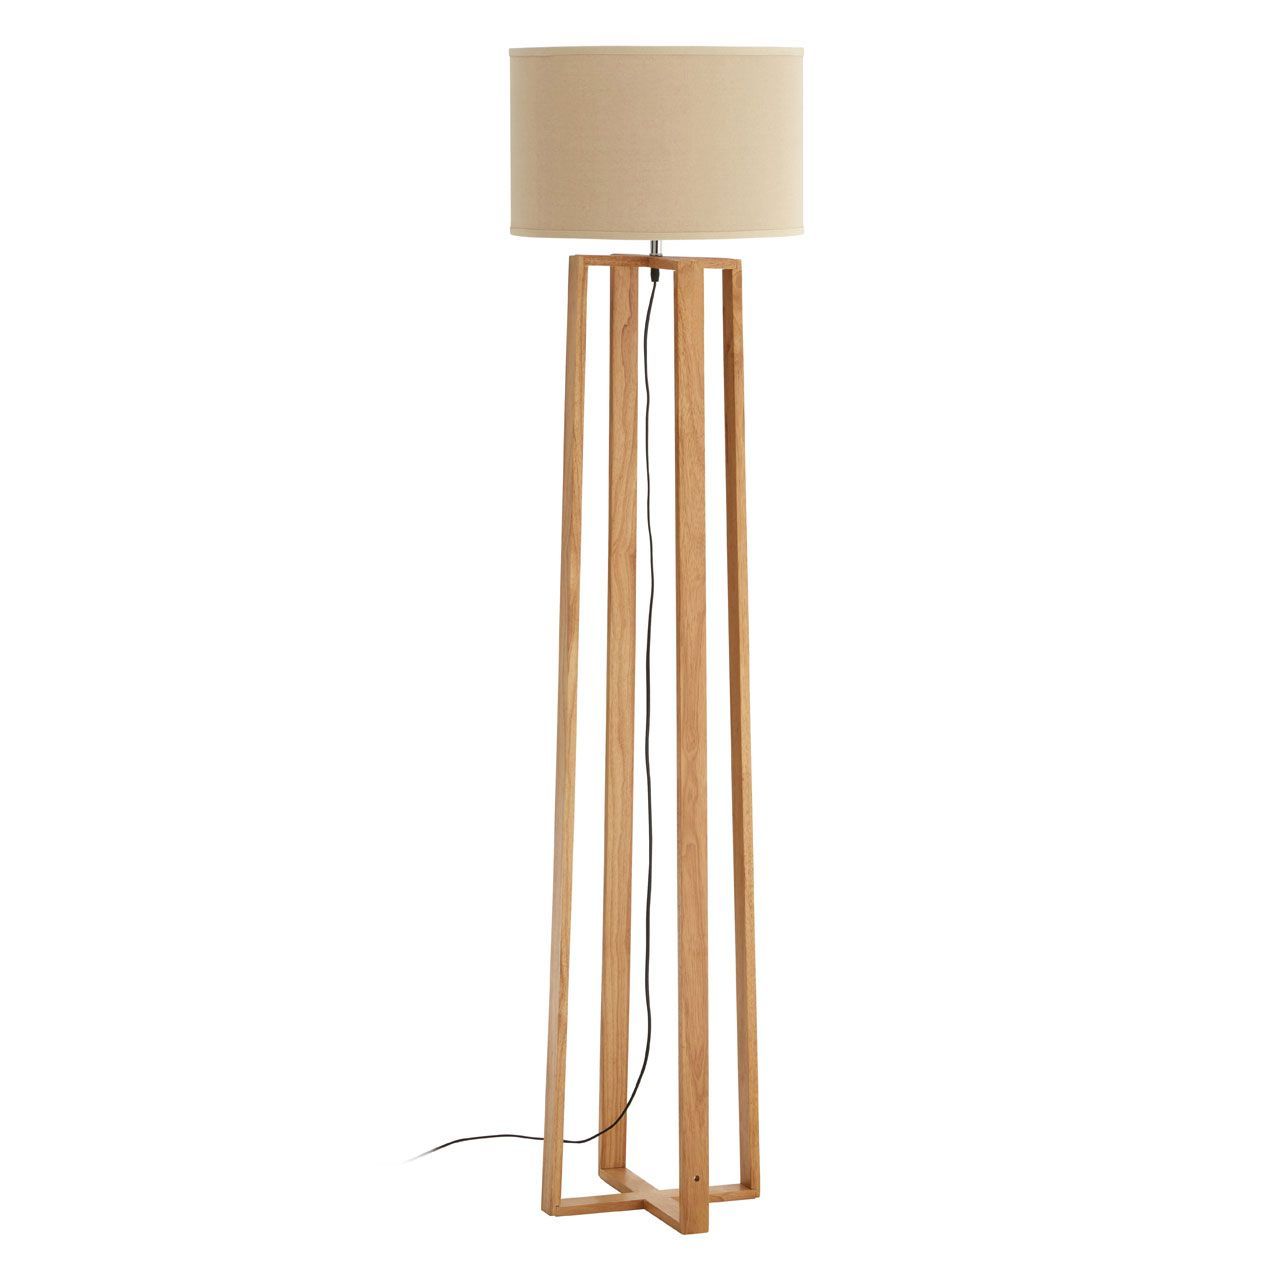 Rubberwood Floor Lamp – The Home Market Within Popular Rubberwood Floor Lamps (View 2 of 15)